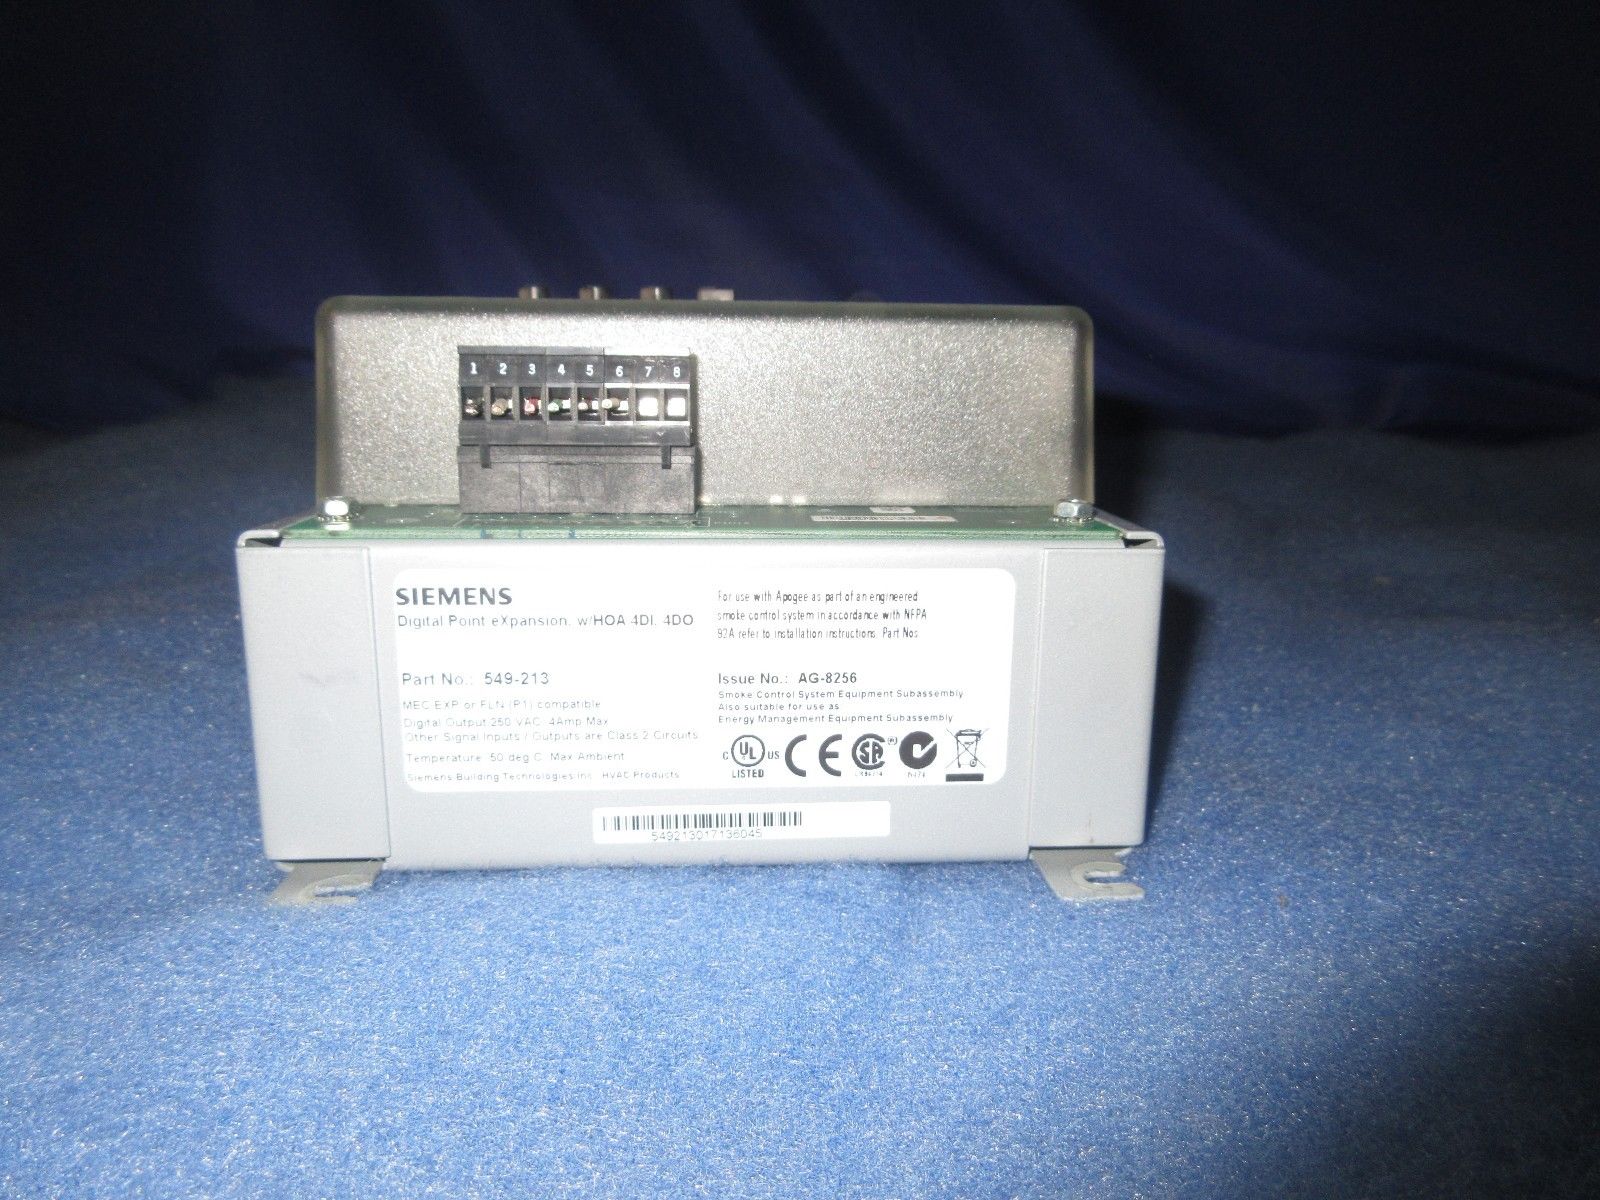 Siemens Digital Point Expansion 549-213 APOGEE Automation 4DI 4DO 